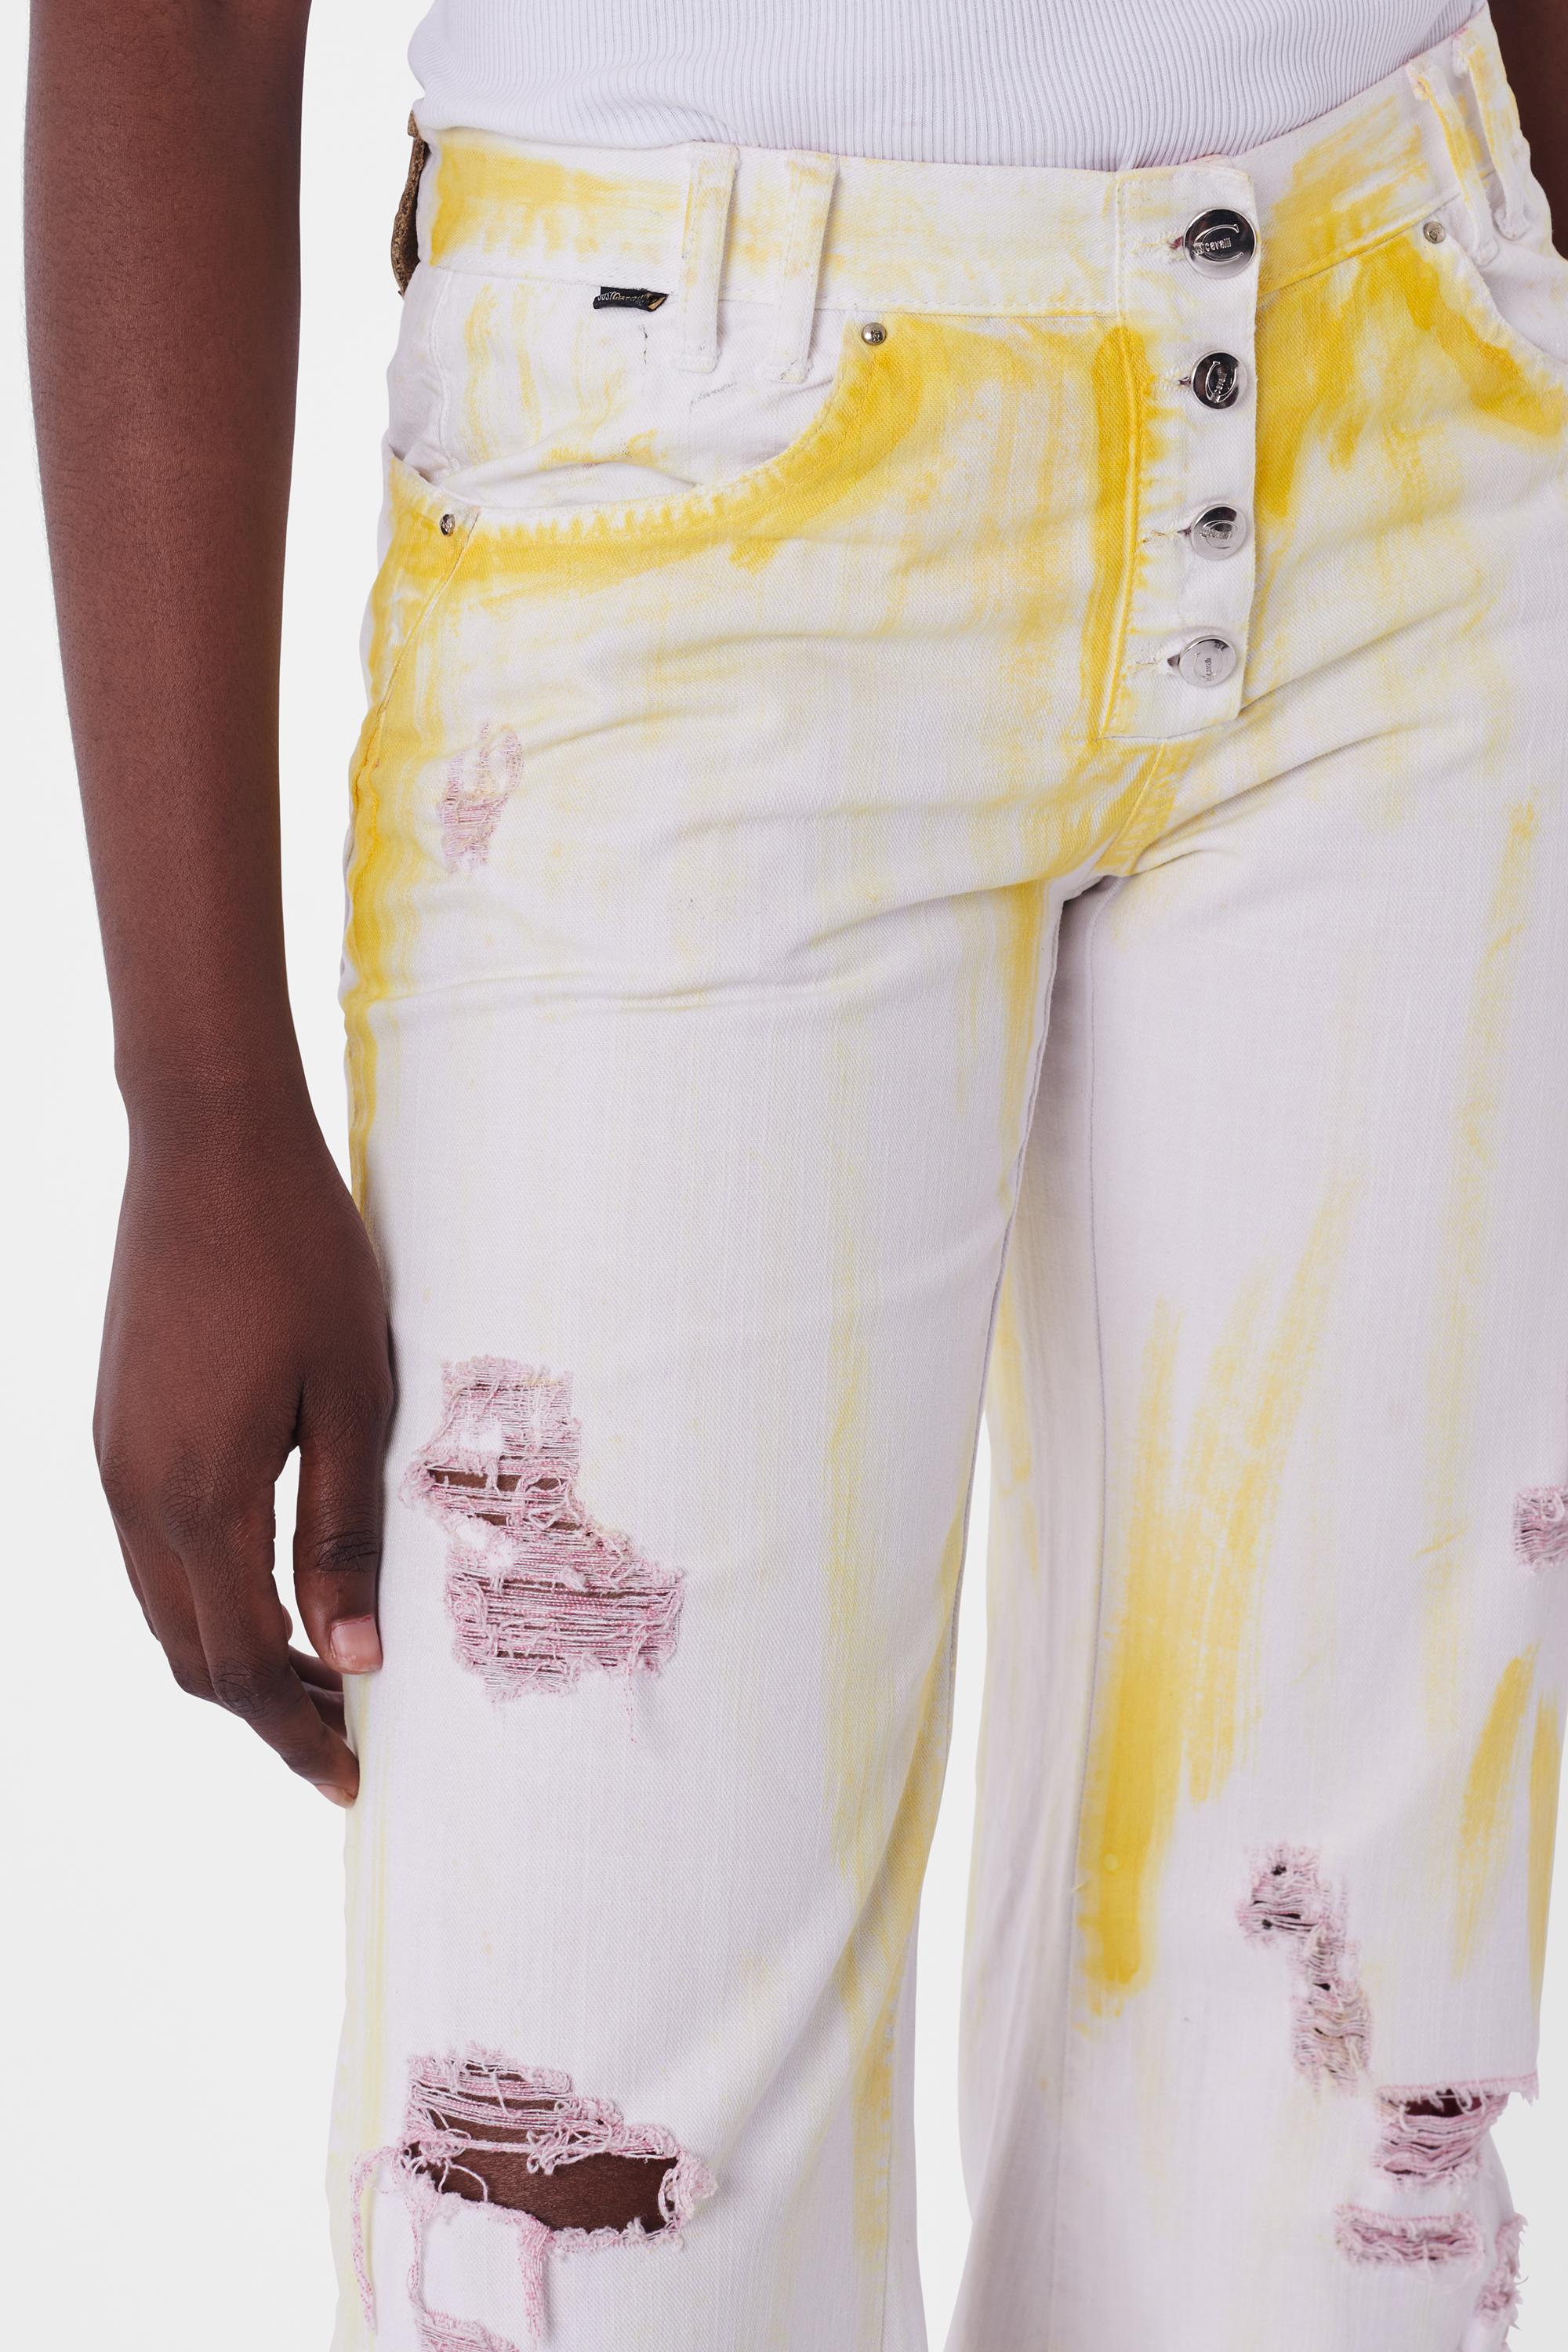 2004 Distressed Hand Painted Jeans In Excellent Condition For Sale In London, GB